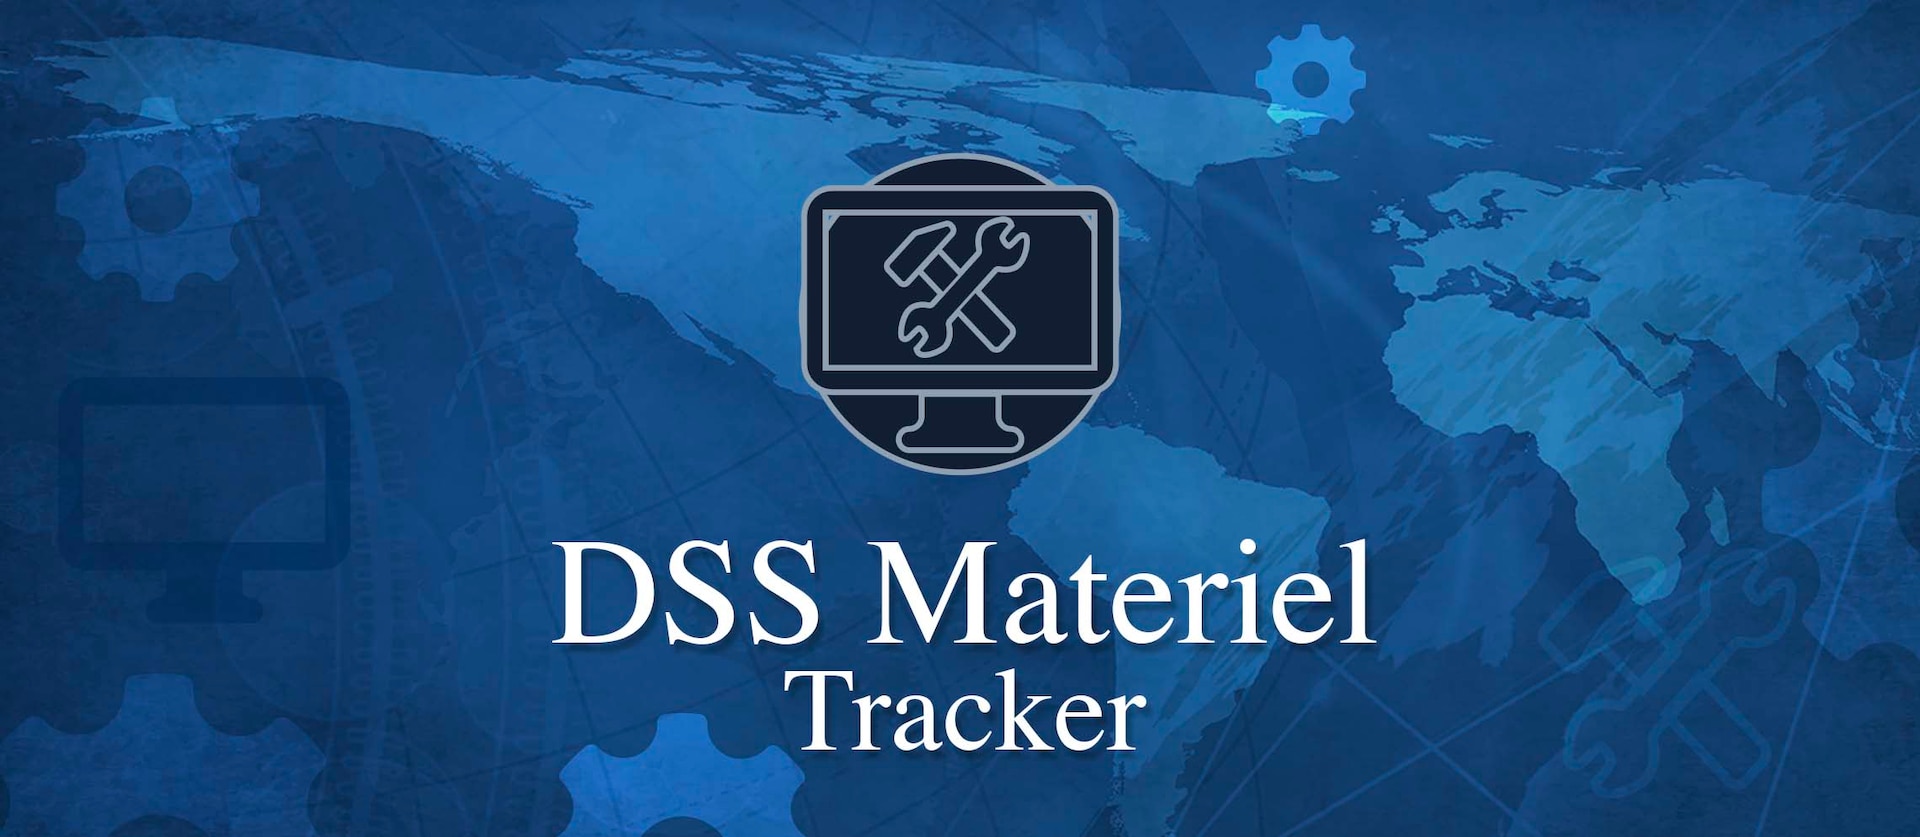 Application graphic for DSS Materiel Tracker